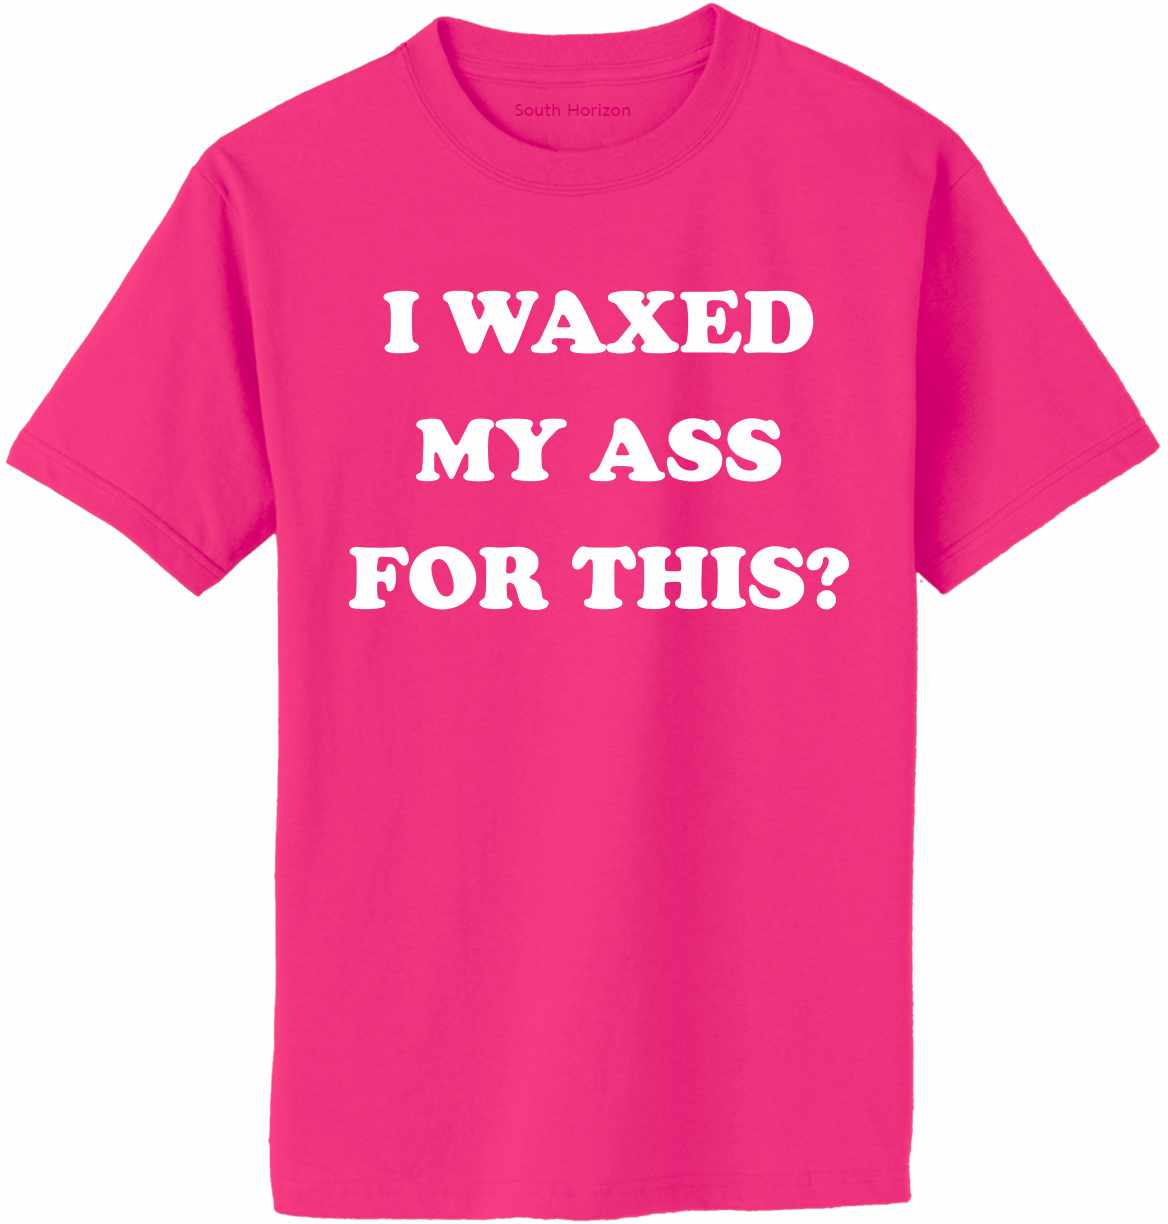 I Waxed My Ass For This on Adult T-Shirt